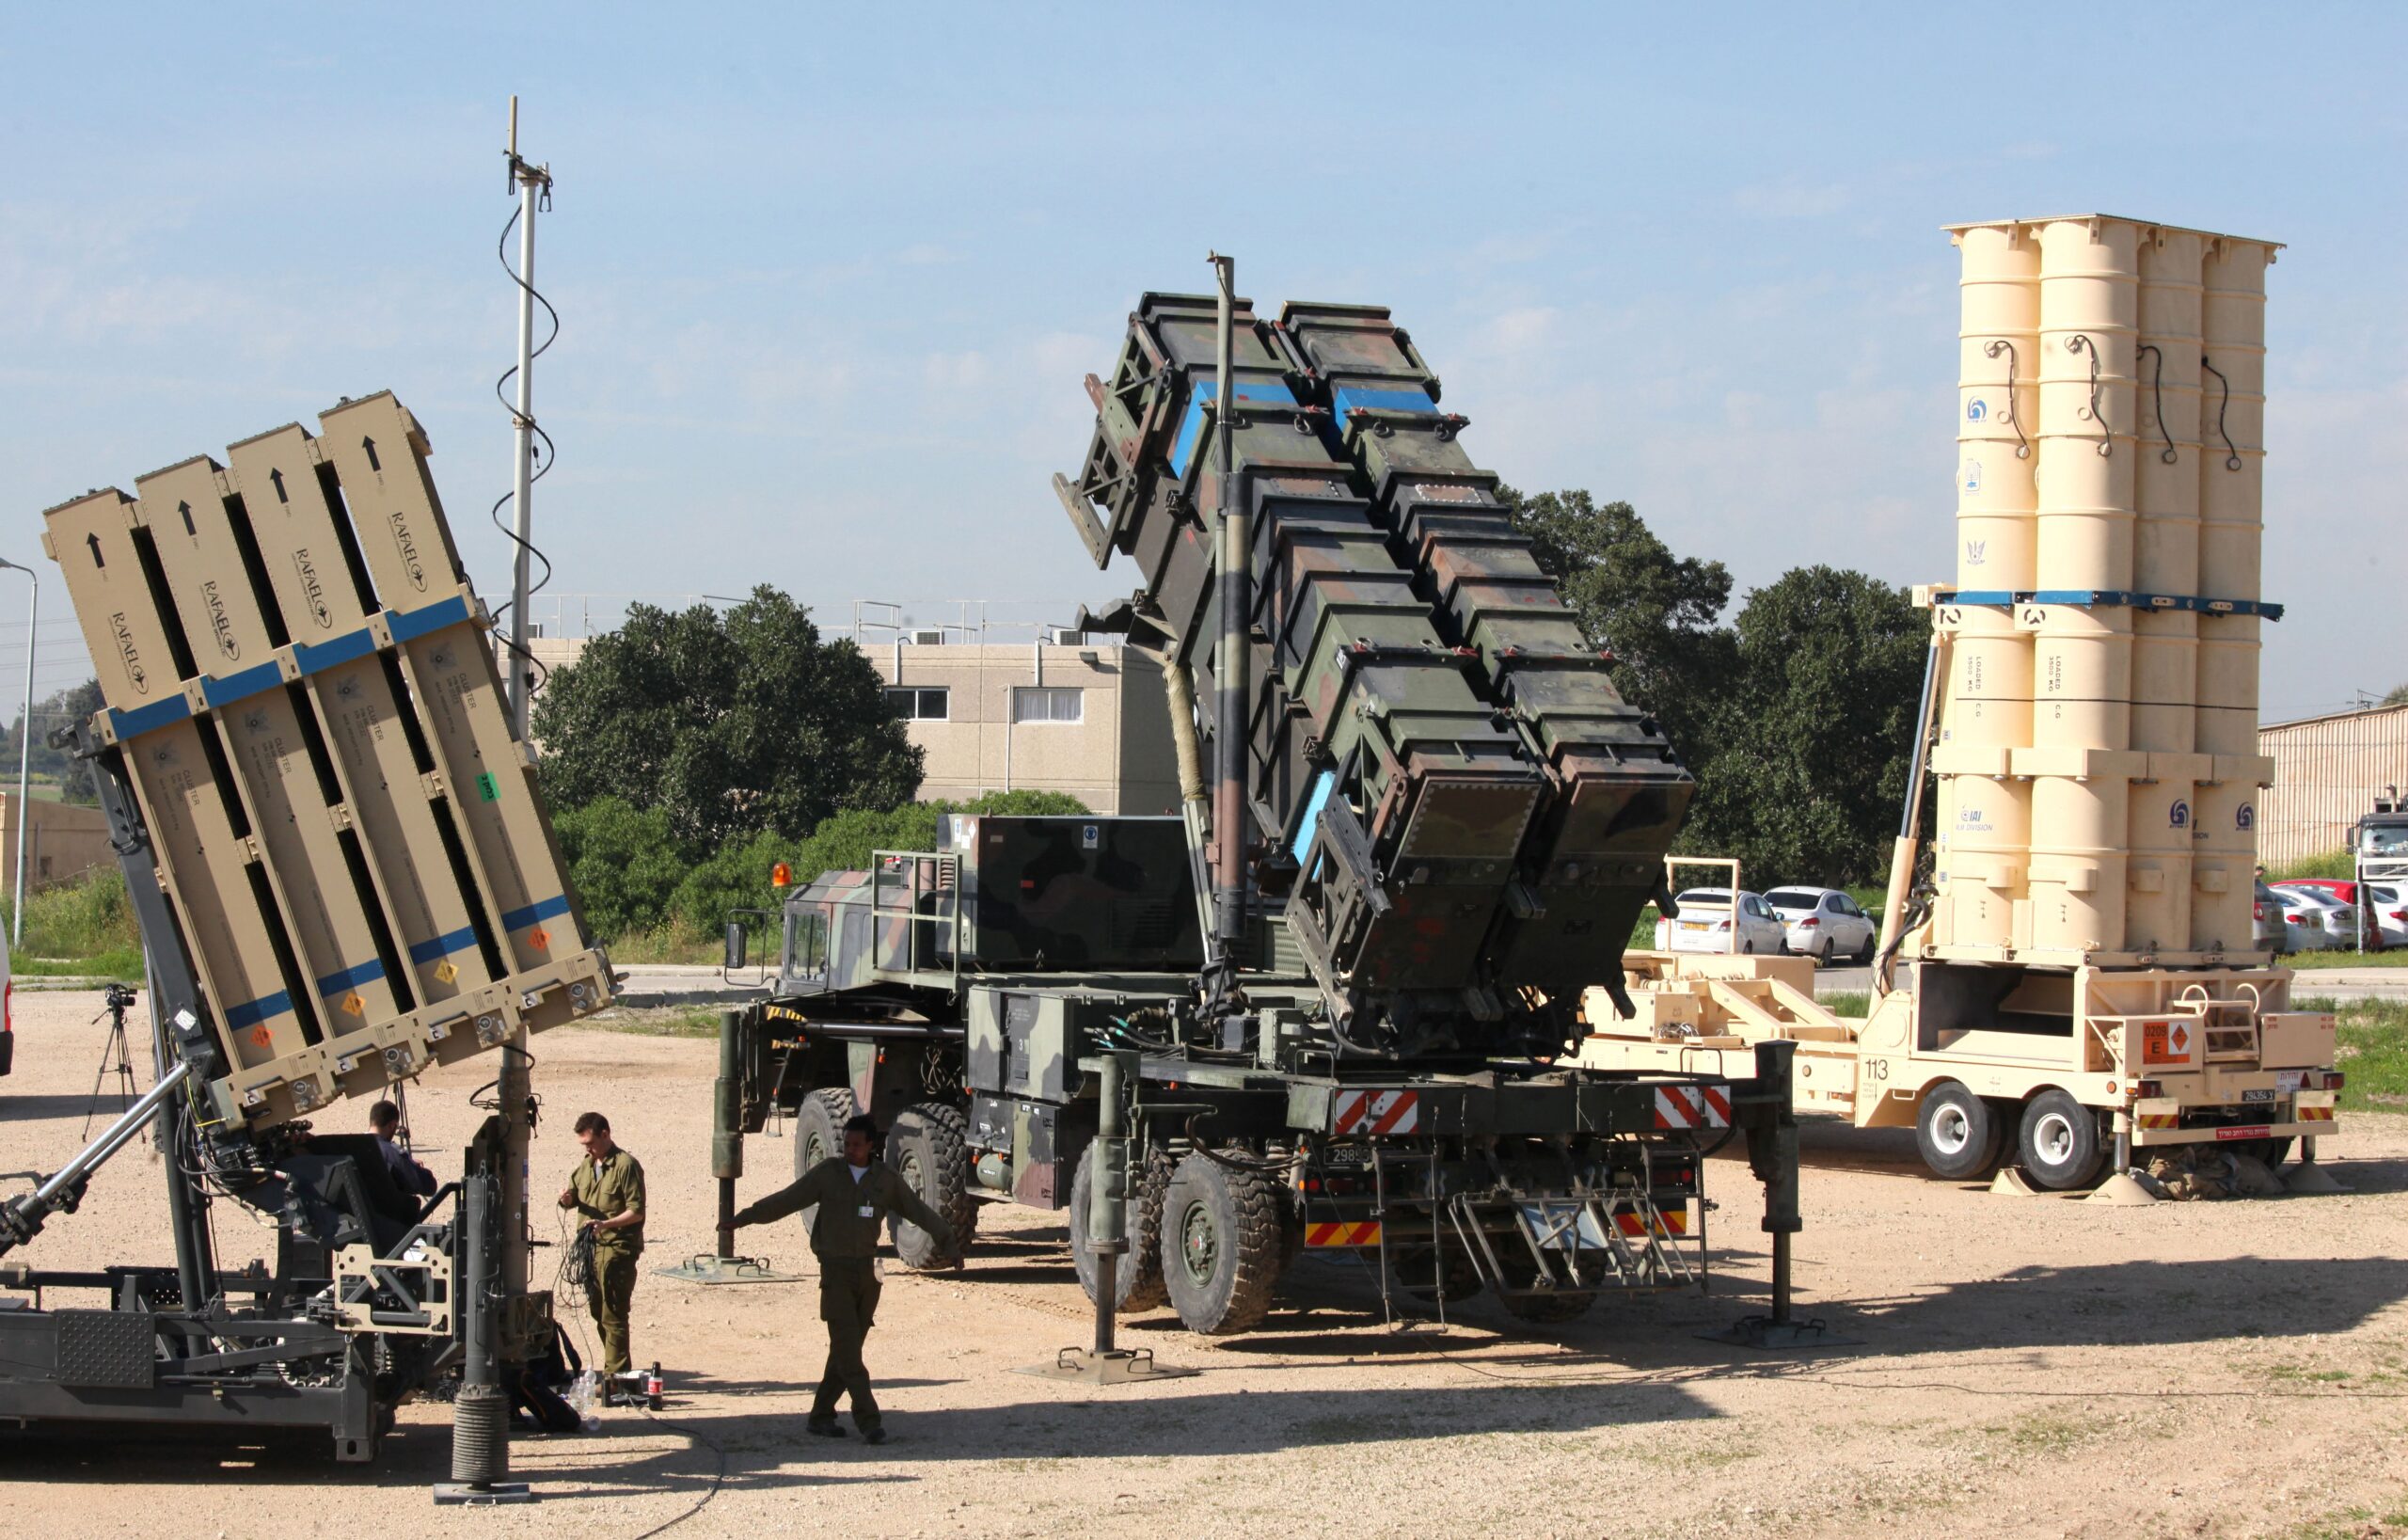 Israeli soldiers walk near an Israeli Irone Dome defence system (L), a surface-to-air missile (SAM) system, the MIM-104 Patriot (C), and an anti-ballistic missile the Arrow 3 (R) during Juniper Cobra's joint exercise press briefing at Hatzor Israeli Air Force Base in central Israel, on February 25, 2016. - Juniper Cobra, is held every two years where Israel and the United States train their militaries together to prepare against possible ballistic missile attacks, as well as allowing the armies to learn to better work together. (Photo by GIL COHEN-MAGEN / AFP) (Photo by GIL COHEN-MAGEN/AFP via Getty Images)